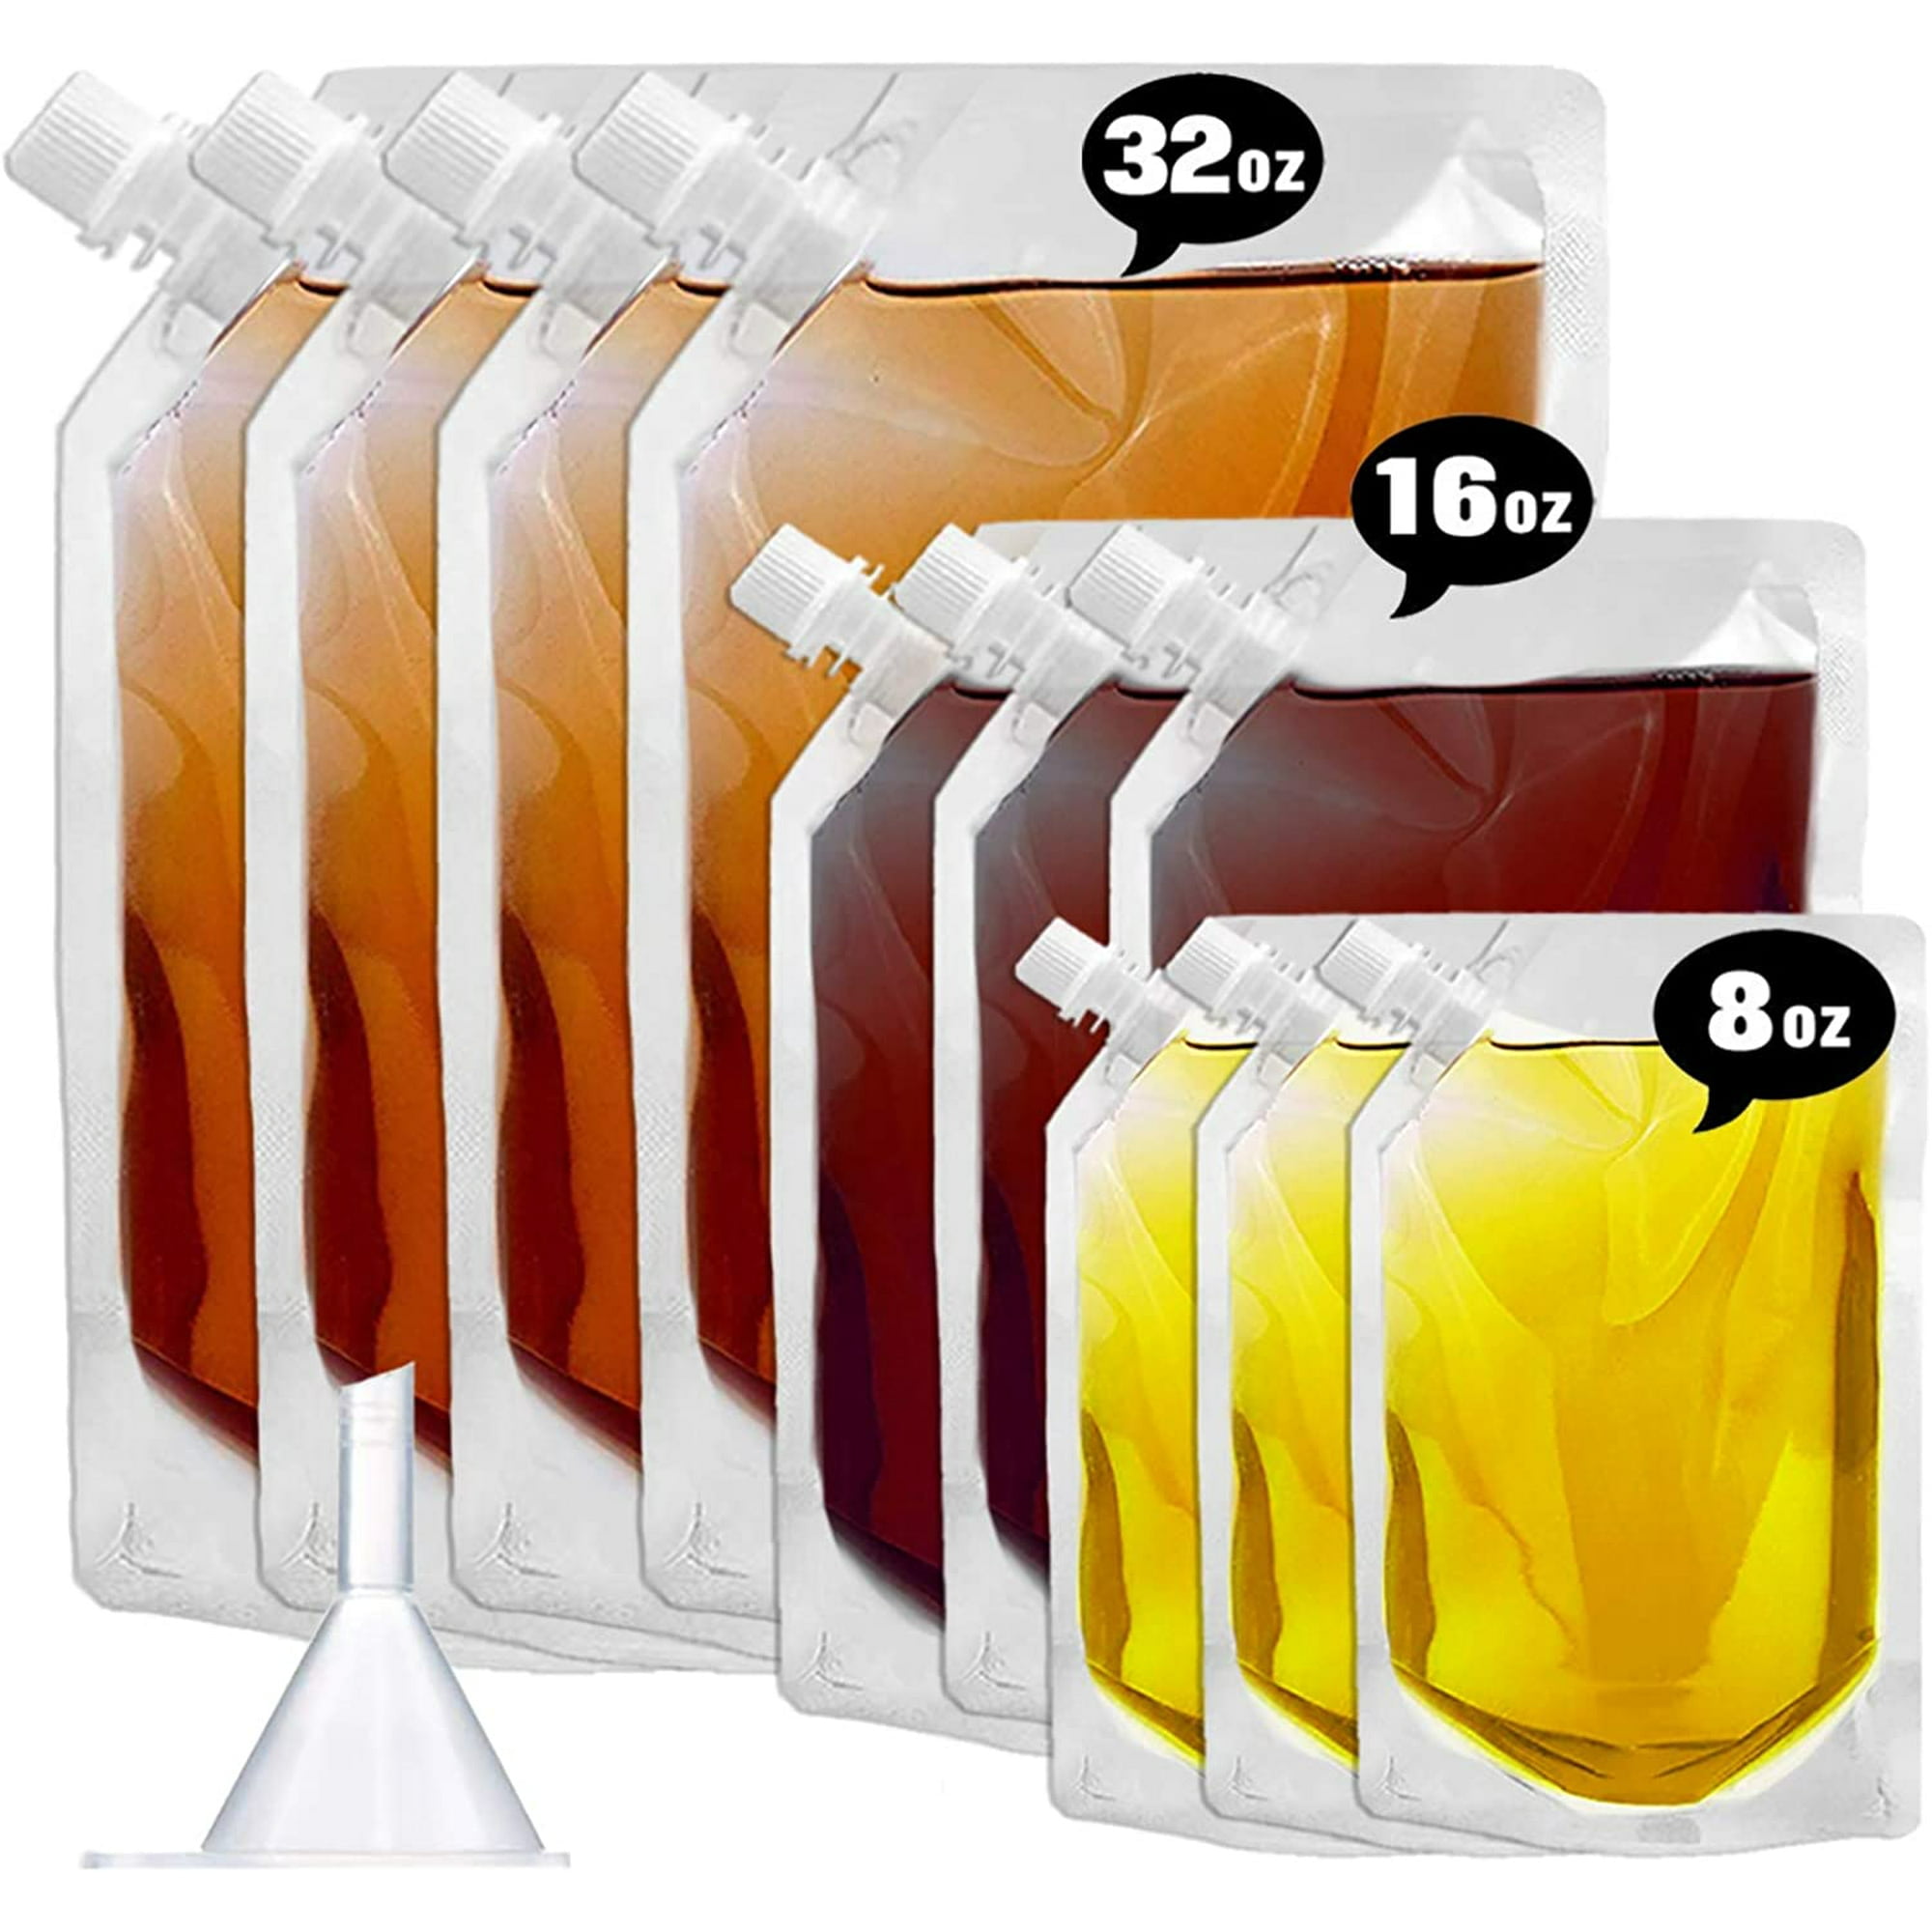 20 Pcs Liquor Flasks Cruise Pouch Reusable Sneak Travel Drinking Alcohol  Flask Concealable Plastic Flasks bags with Funnel (16 oz)